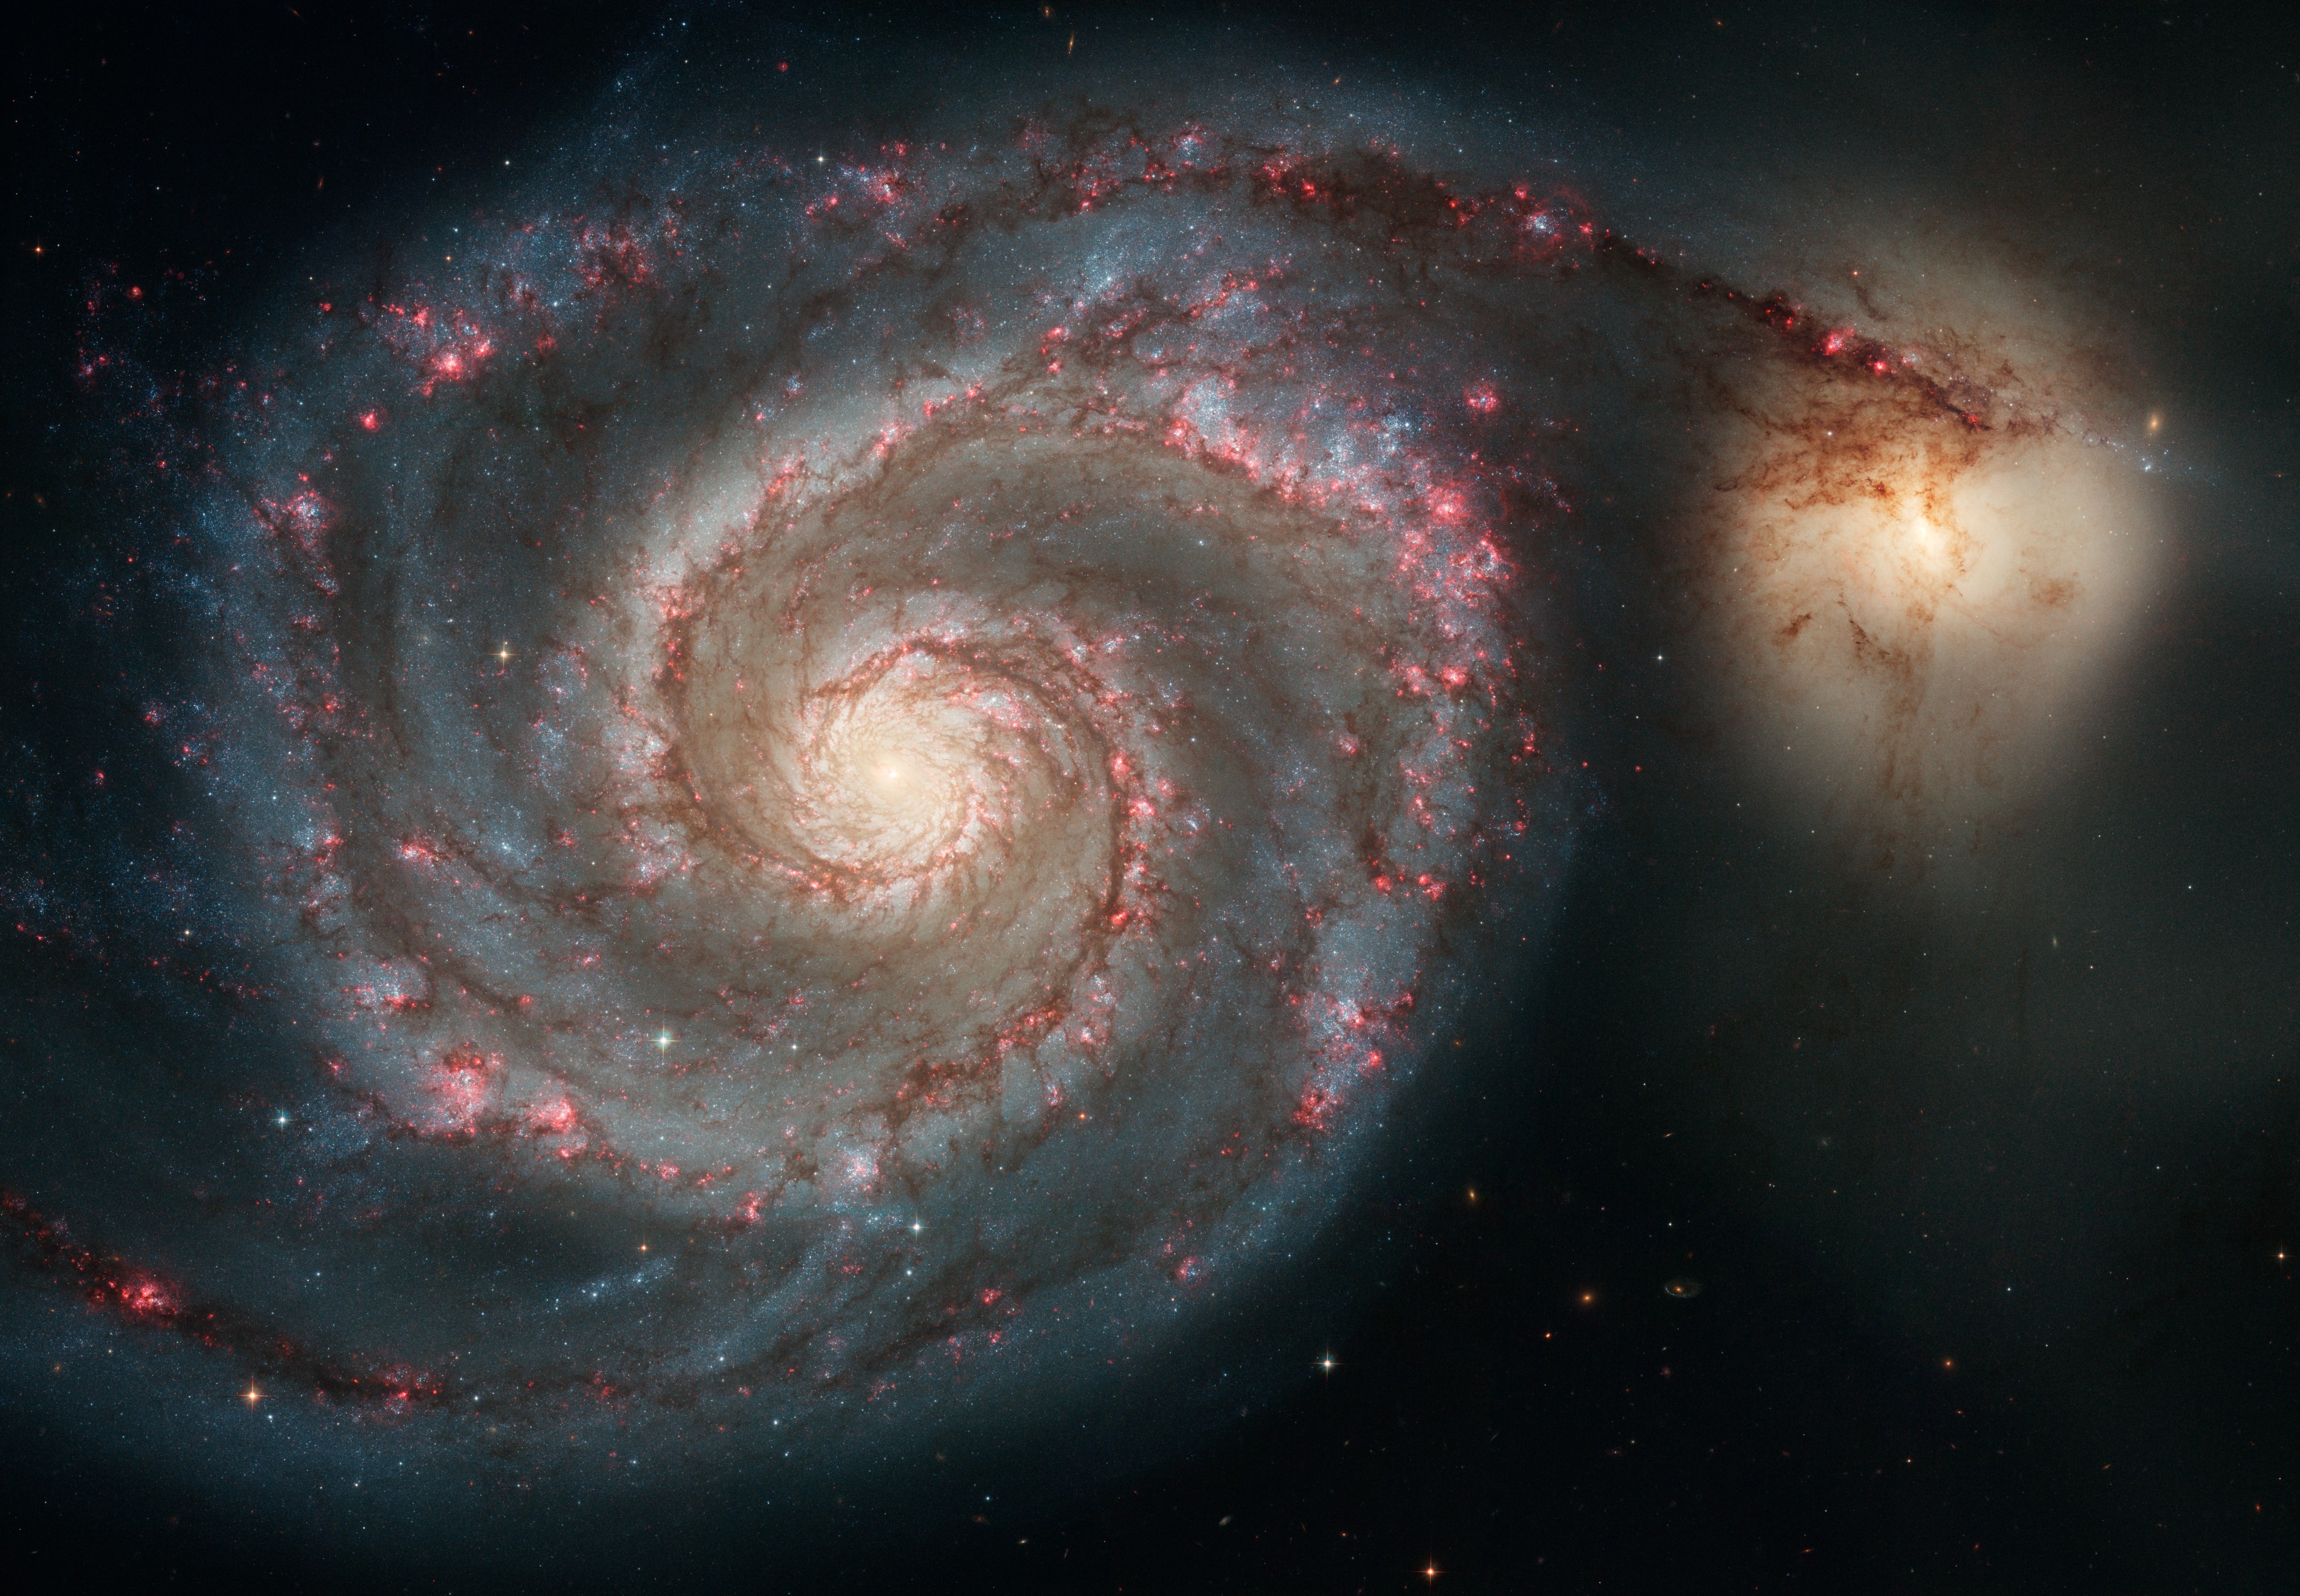 Large spiral galaxy as seen from the top. On the left, the large galaxy with its purple and blue arms spiraling around. To the right, a smaller whiter galaxy is connected to one of the arms of the larger galaxy.